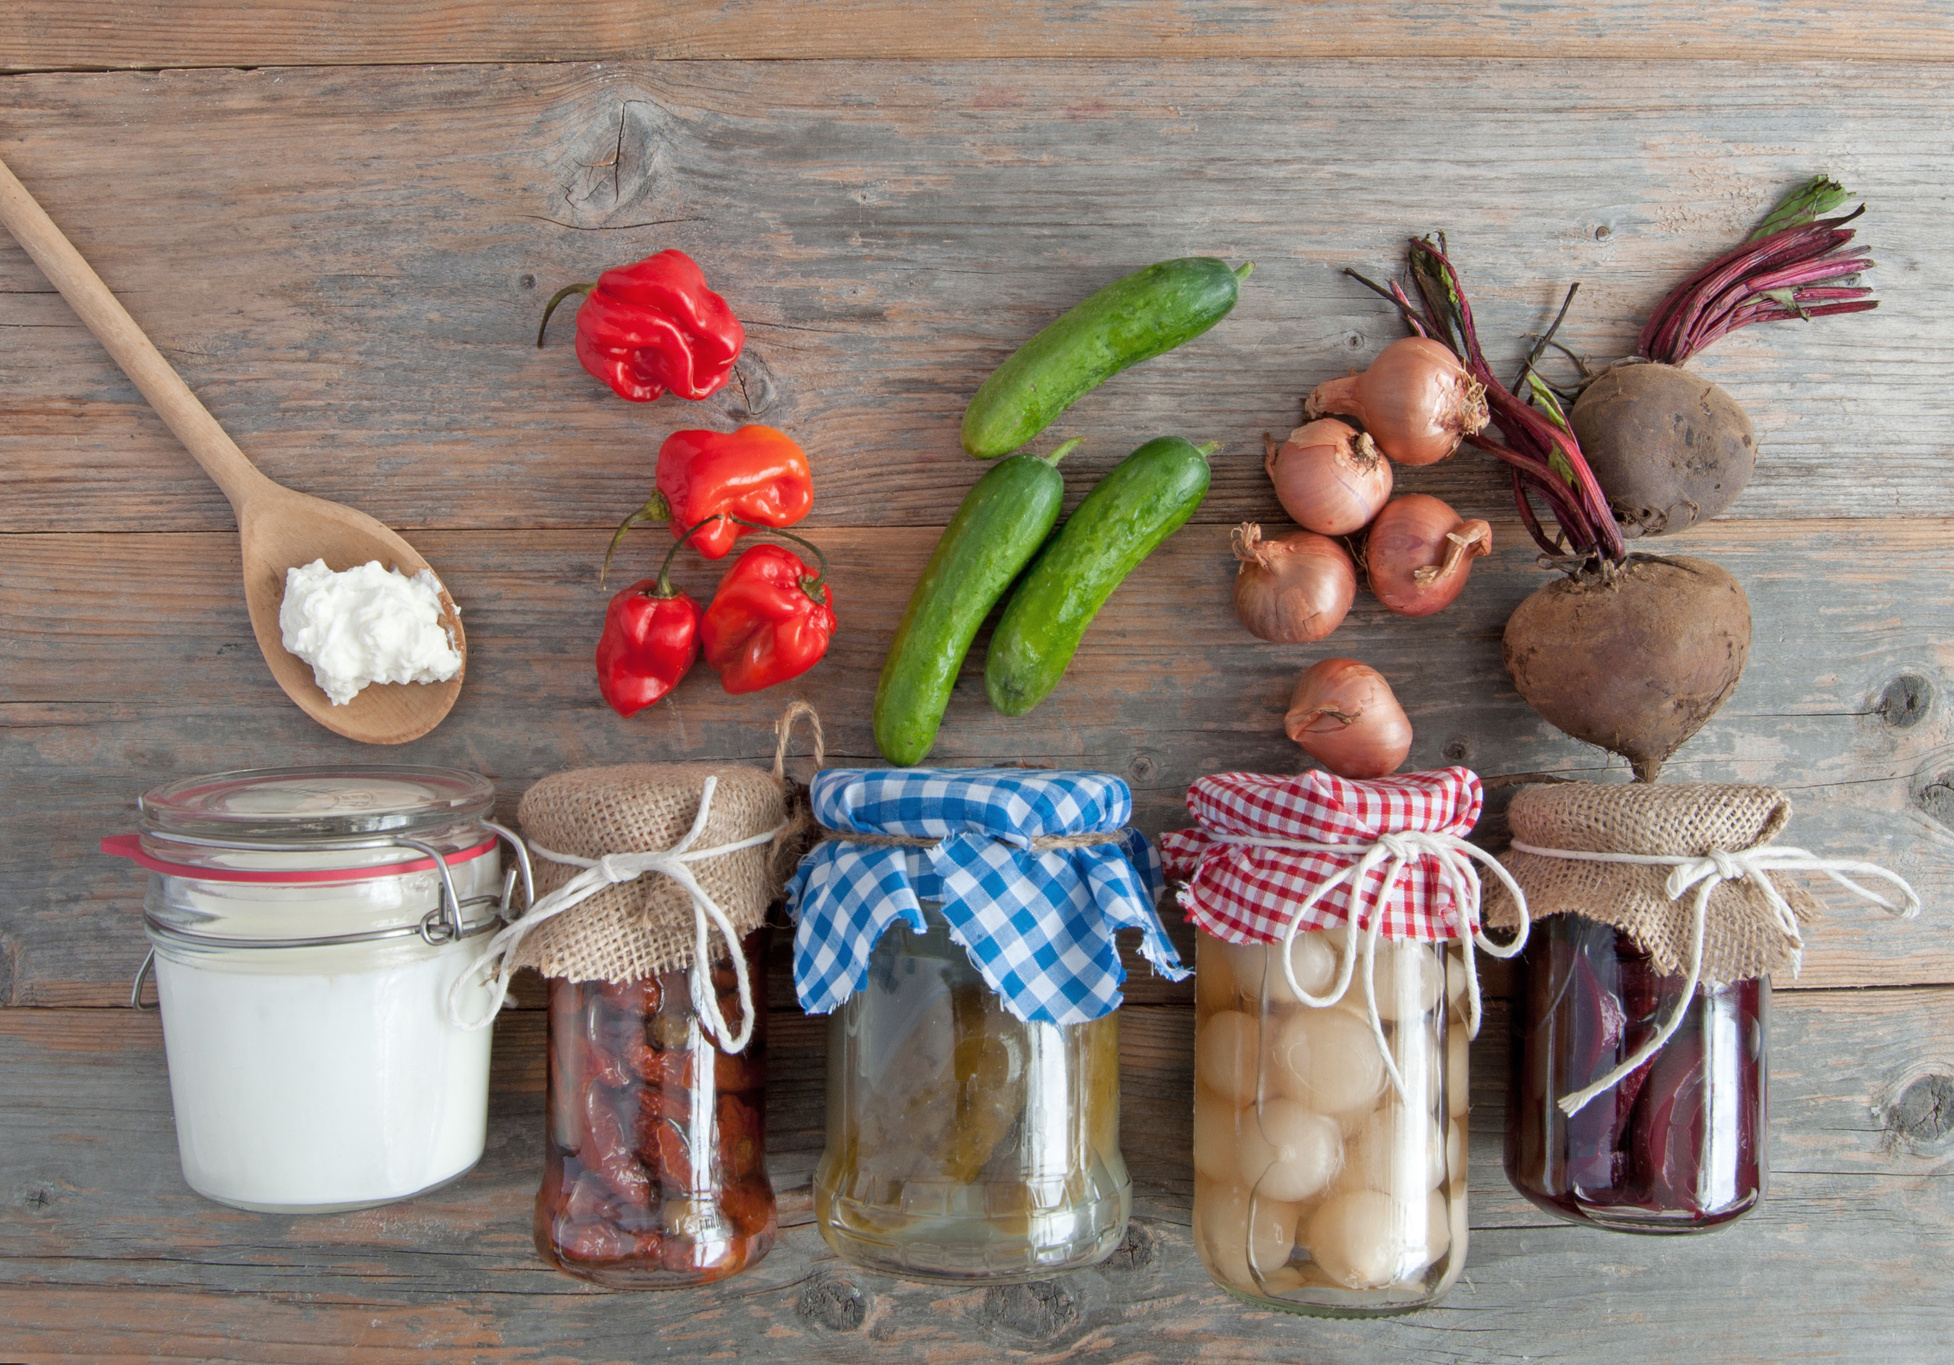 Naturally fermented foods